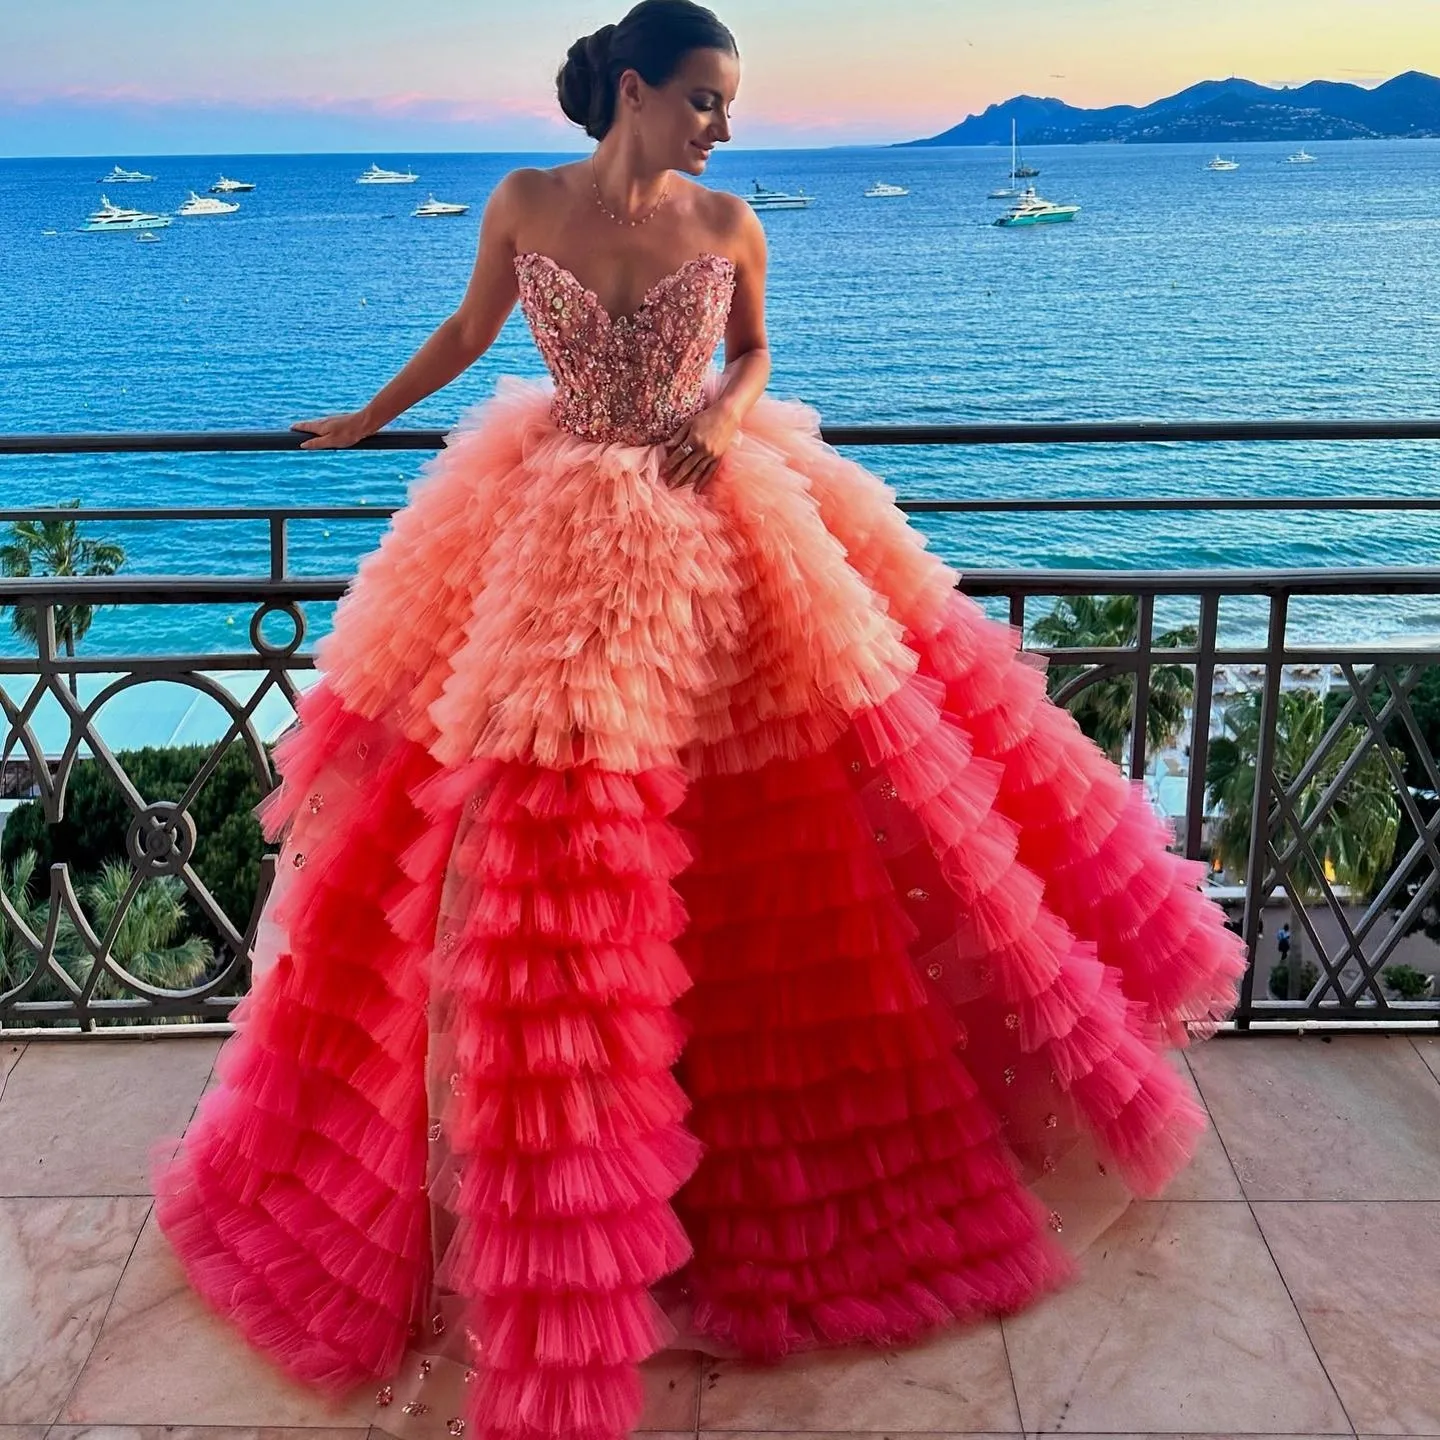 

Luxury Rhinstone Formal Party Dresses Colorful Fluffy Tiered Tulle A-line Long Women Maxi Gowns Beaded Bridal Dress